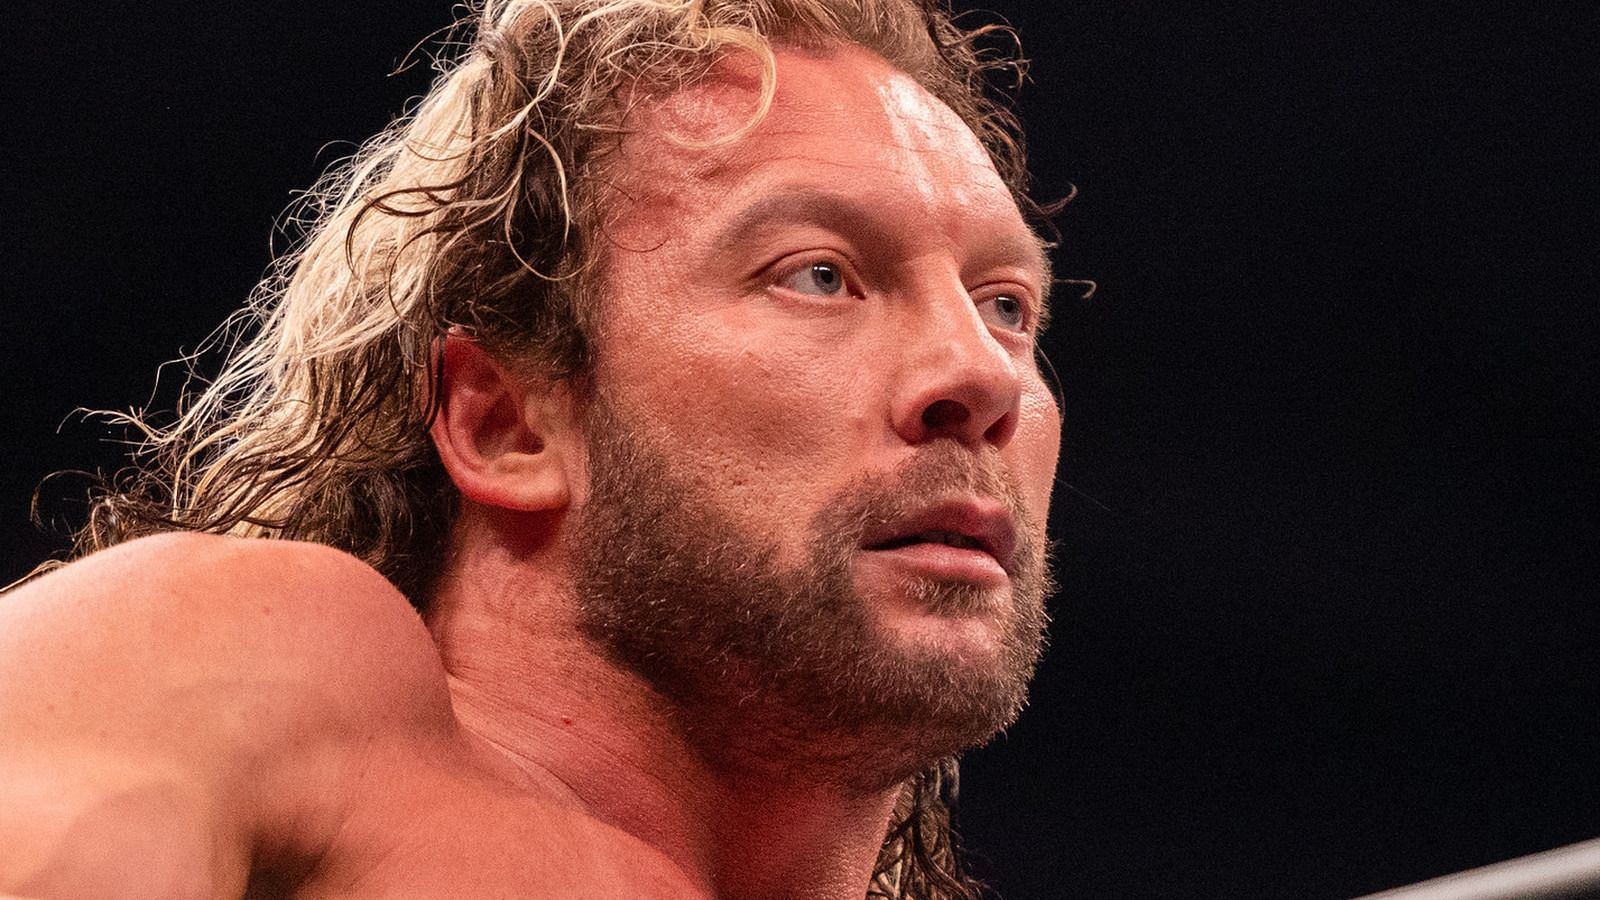 Kenny Omega is also one of AEW